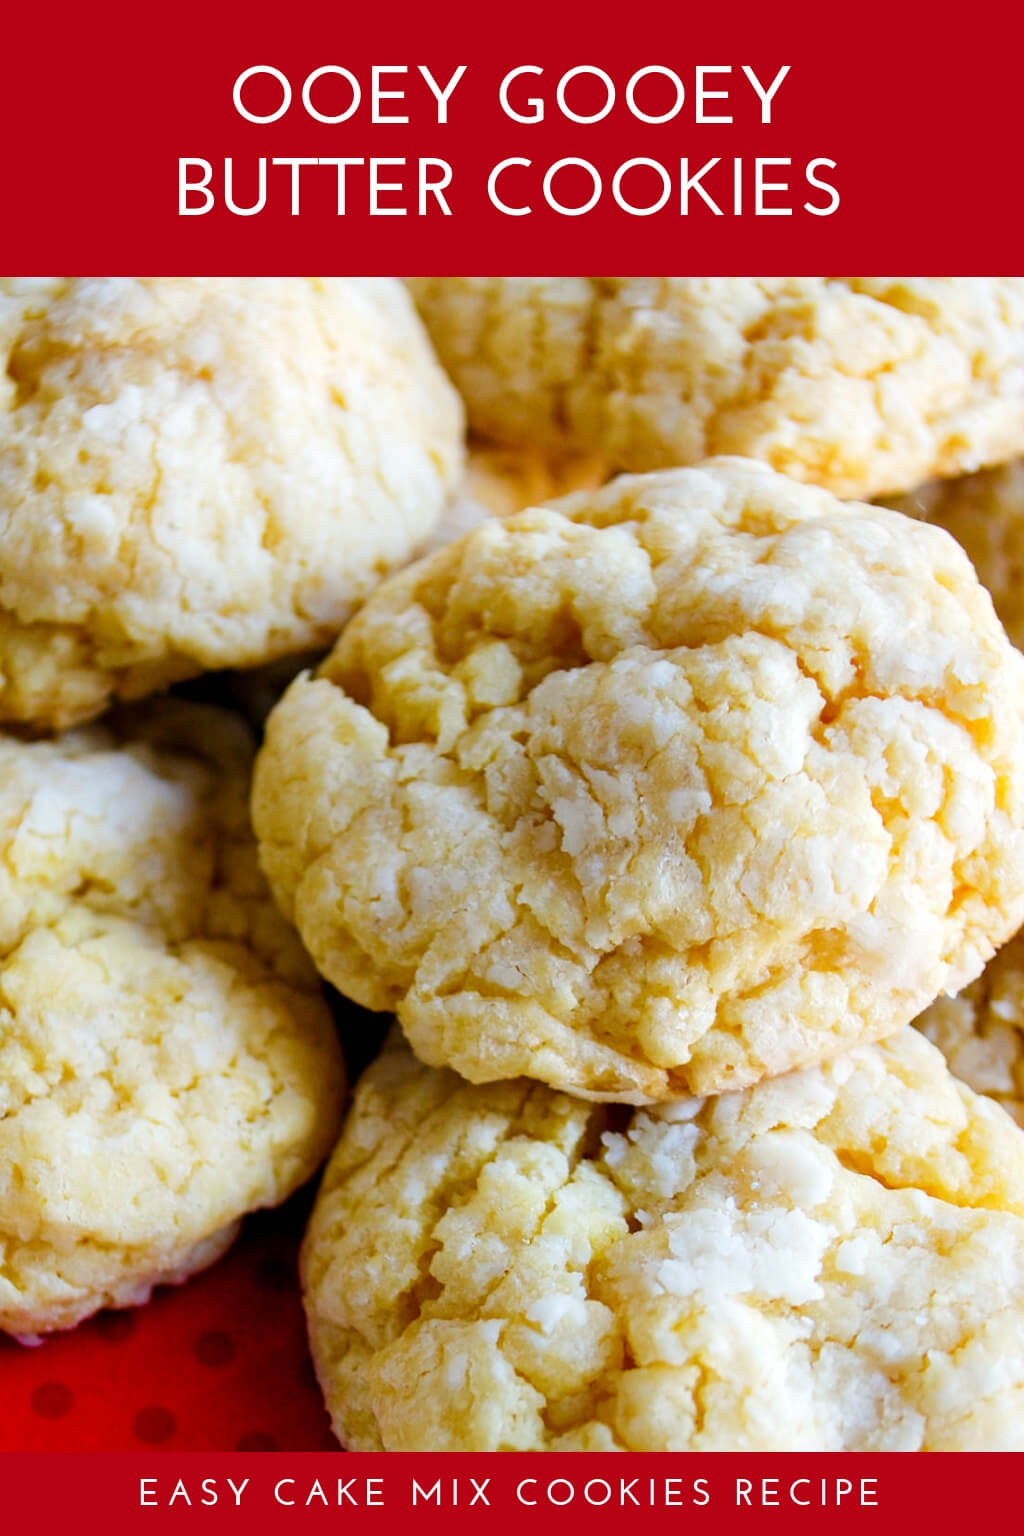 Ooey gooey butter cookies recipe - you'll never guess that these delicious cookies come from a yellow cake mix! Make these St. Louis quick and easy cake mix cookies from scratch for Christmas cookie exchanges and school celebrations. #ooey #gooey #butter #cookies #recipe #cake #mix #easy #yellow #christmas #scratch